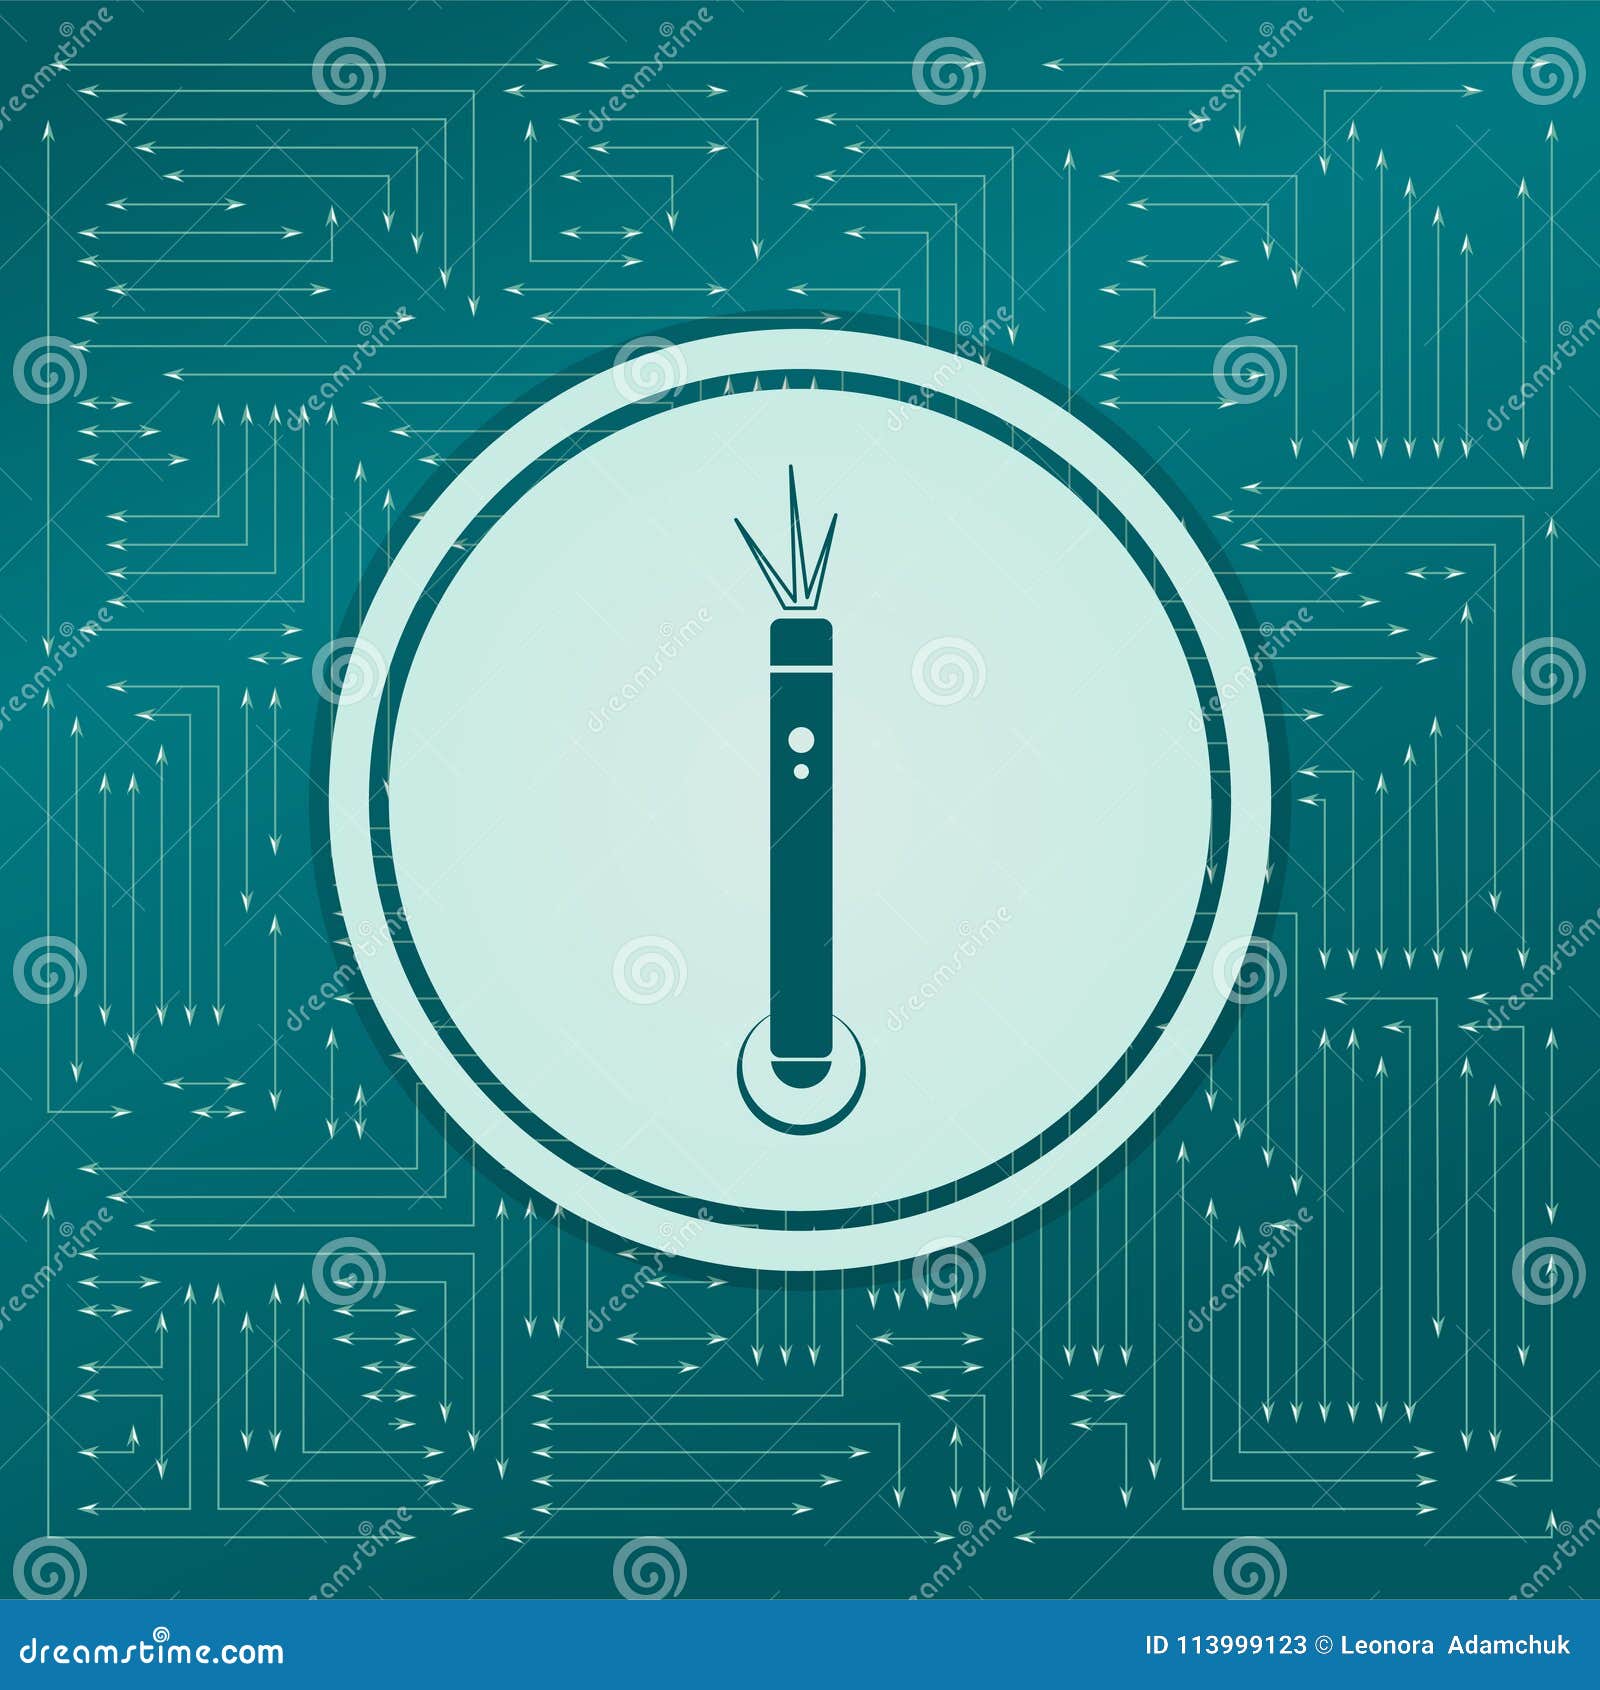 Laser Pointer Icon on a Green Background, with Arrows in Different  Directions. it Appears the Electronic Board. Stock Illustration -  Illustration of device, concept: 113999123